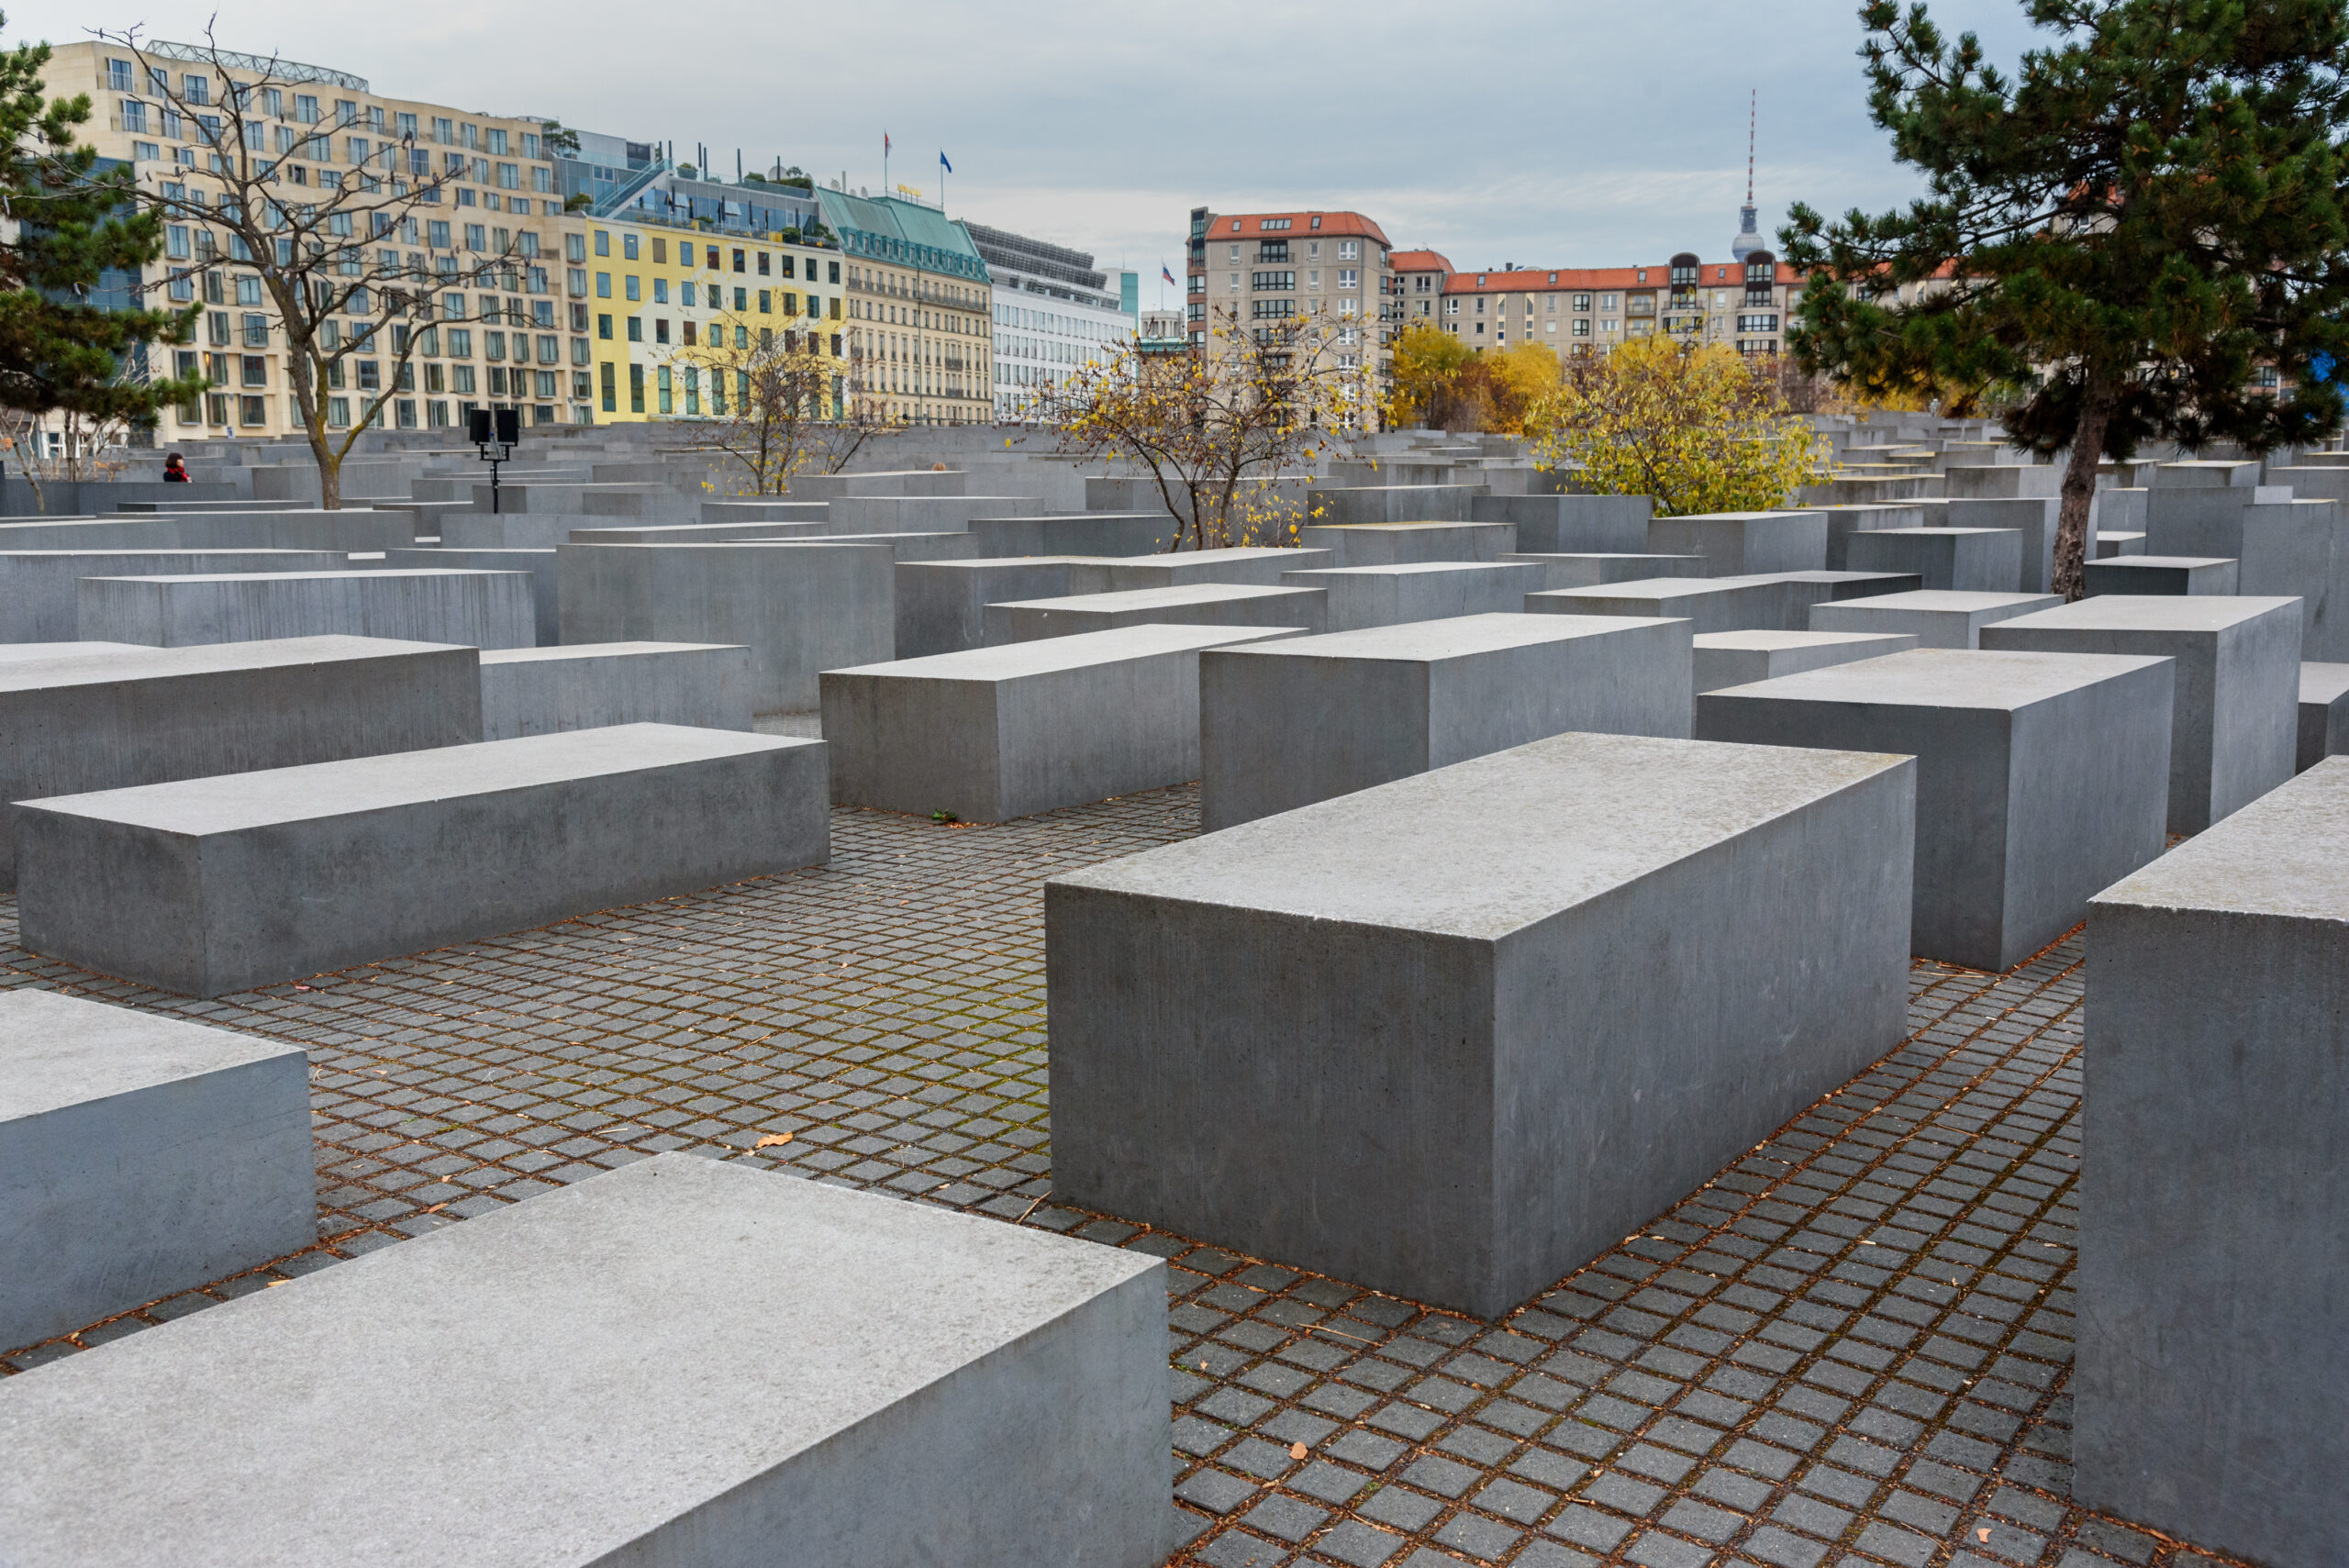 production-services-and-filming-in-berlin-holocaust-memorial